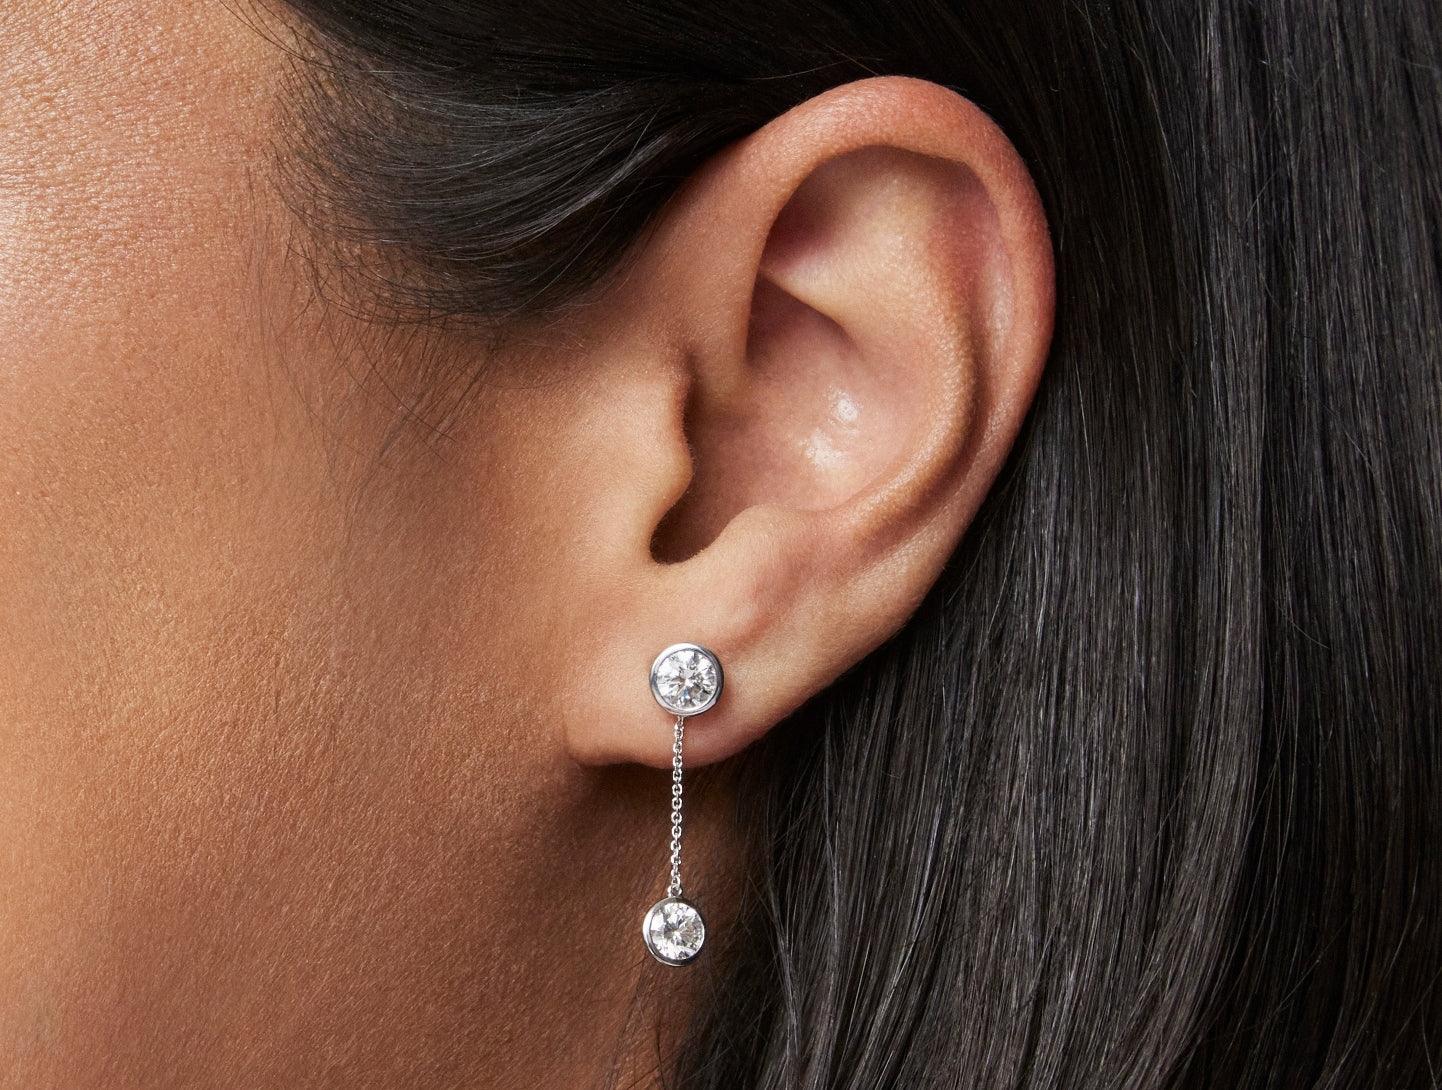 Close up model shot of 1 carat total weight round brilliant drop bezel earring jacket in 14k white gold with a 0.5 carat bezel round brilliant stud